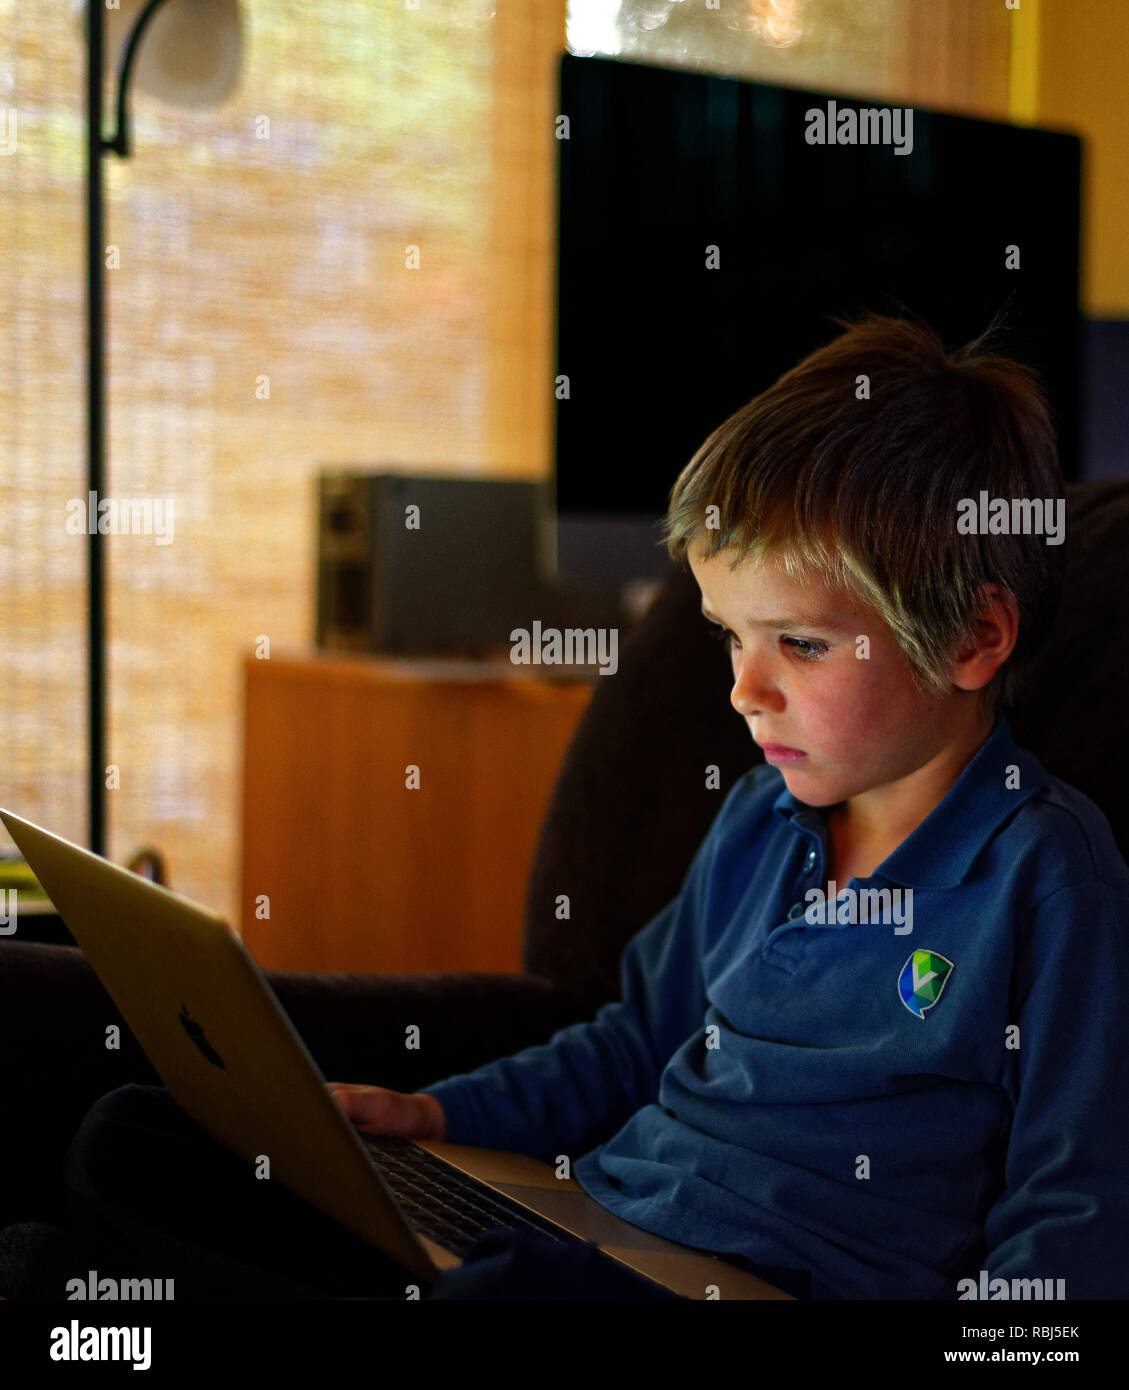 A six year old boy wearing school uniform working on a laptop computer Stock Photo